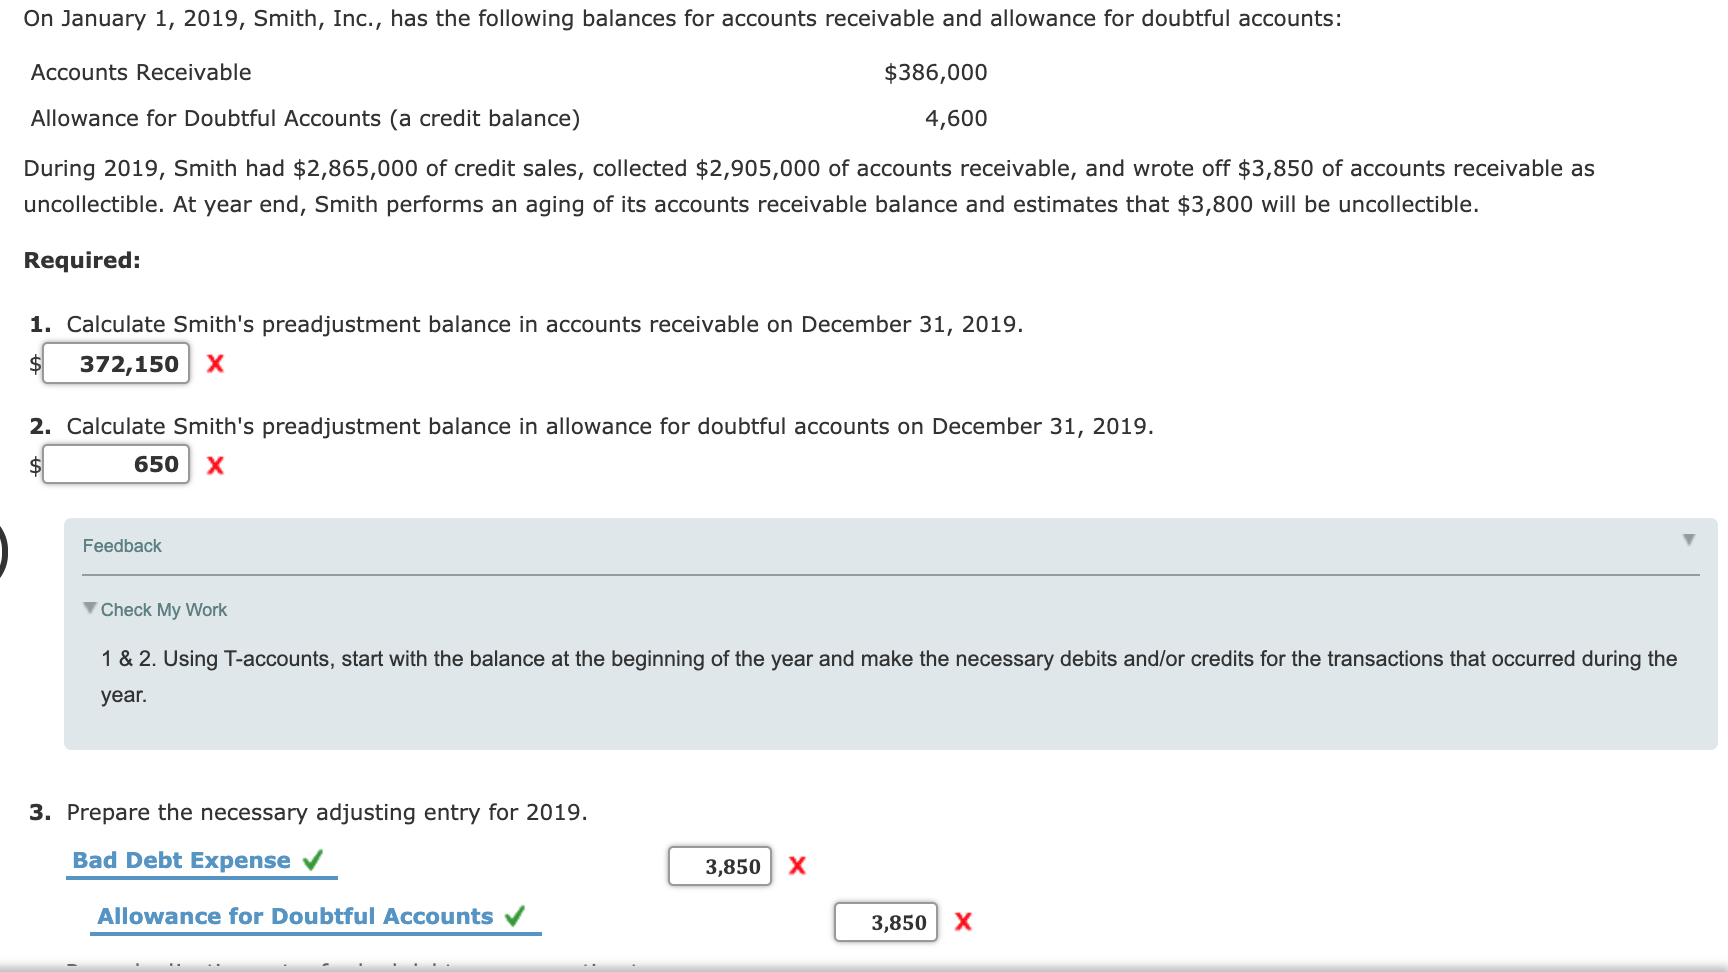 1. Calculate Smith's preadjustment balance in accounts receivable on December 31, 2019.
$
372,150 x
2. Calculate Smith's preadjustment balance in allowance for doubtful accounts on December 31, 2019.
650 X
Feedback
V Check My Work
1 & 2. Using T-accounts, start with the balance at the beginning of the year and make the necessary debits and/or credits for the transactions that occurred during the
year.
3. Prepare the necessary adjusting entry for 2019.
Bad Debt Expense
3,850 X
Allowance for Doubtful Accounts v
3,850 X
